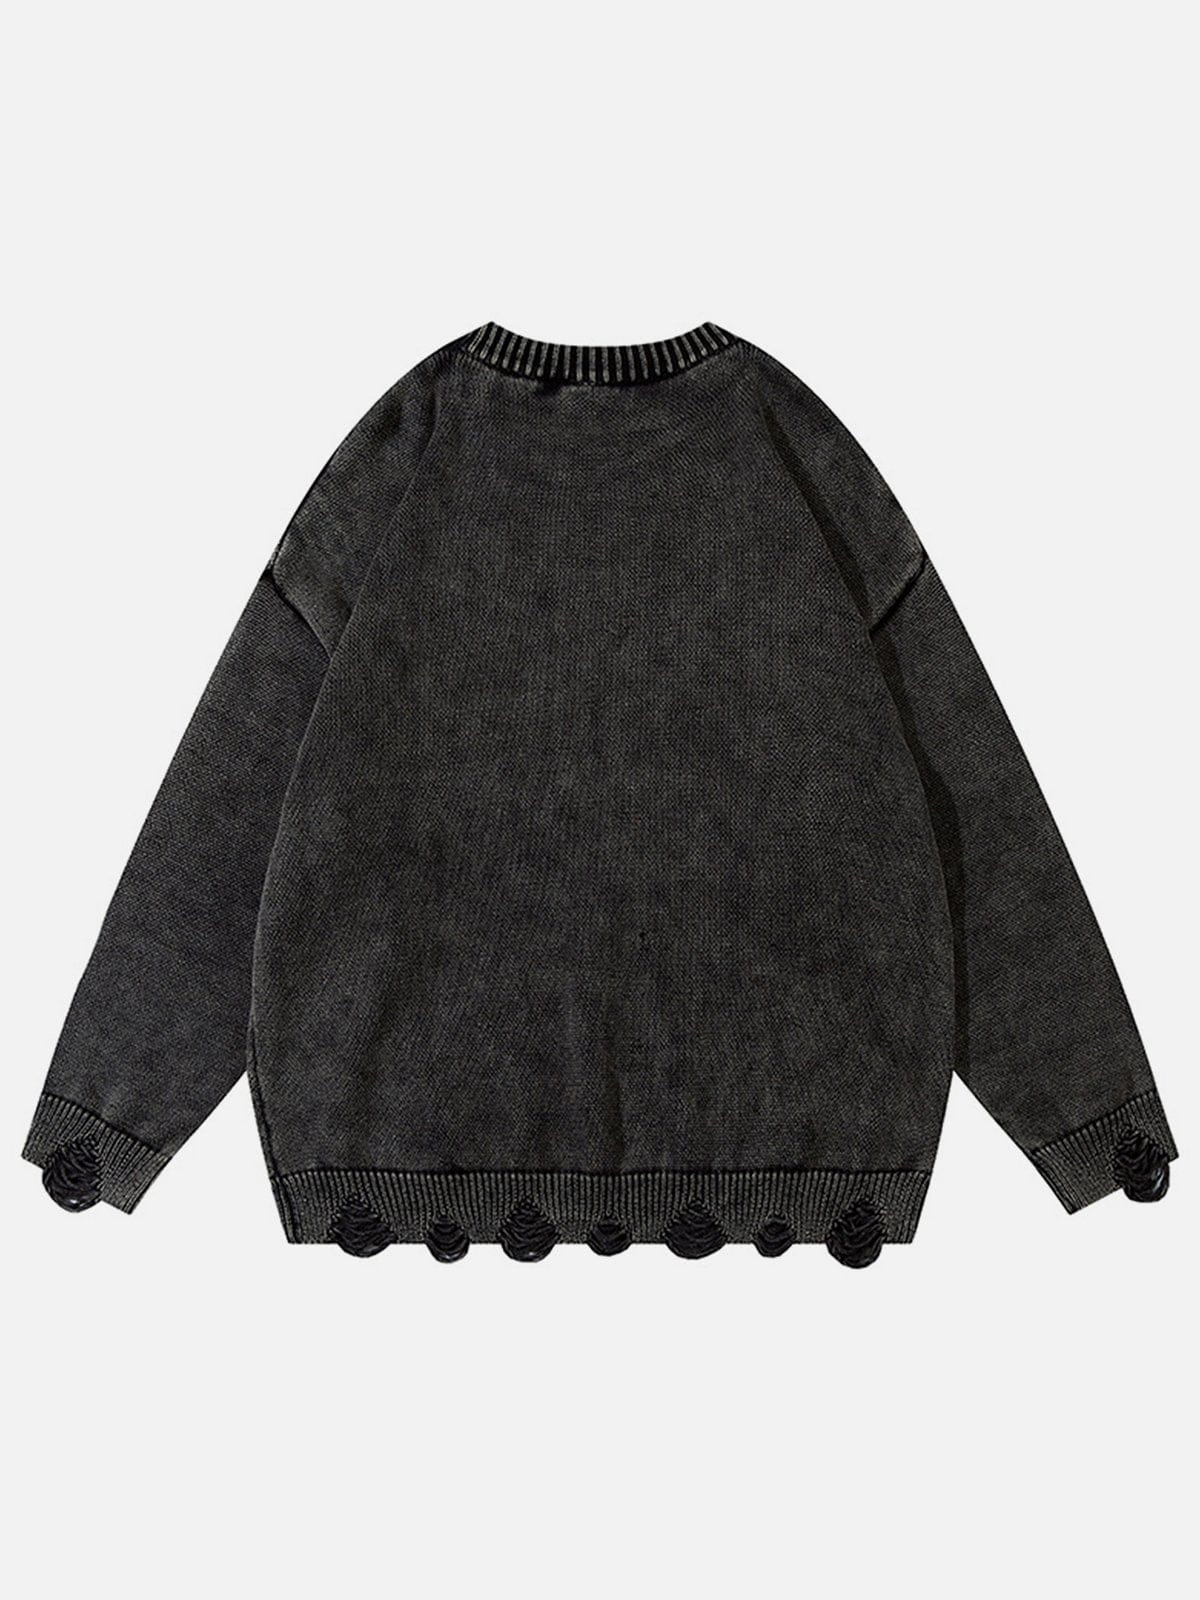 Aelfric Eden Washed Bow Distressed Sweater